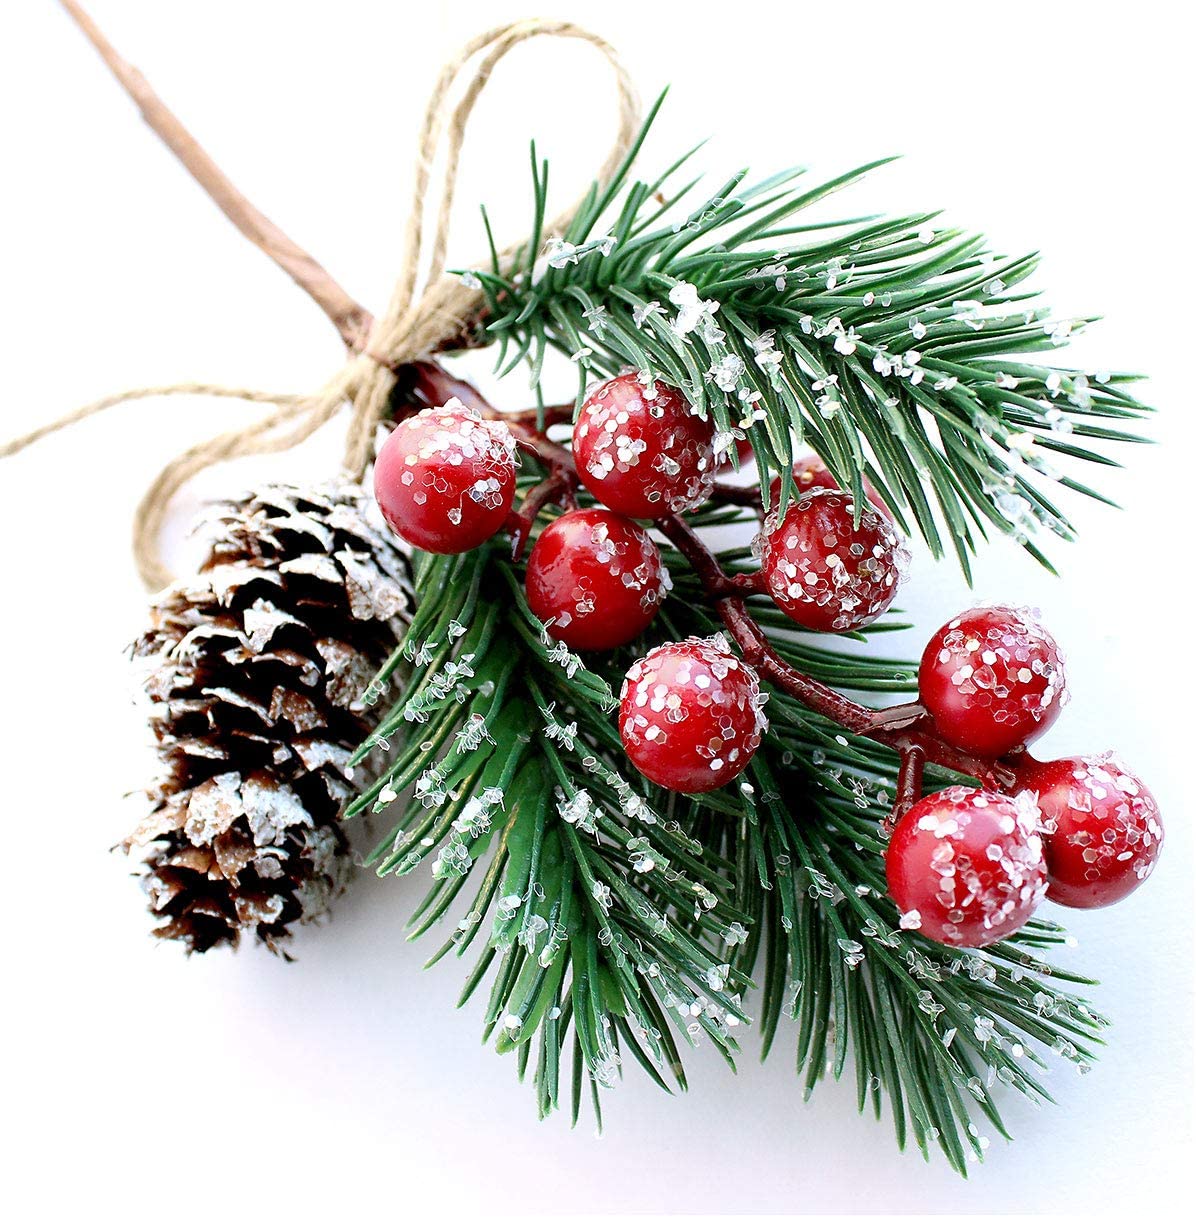 Red Berry Stems Pine Branches Evergreen Christmas Berries dcor 8 Pcs Artificial Pine Cones Branch Craft Wreath Pick & Winter Holiday Floral Picks